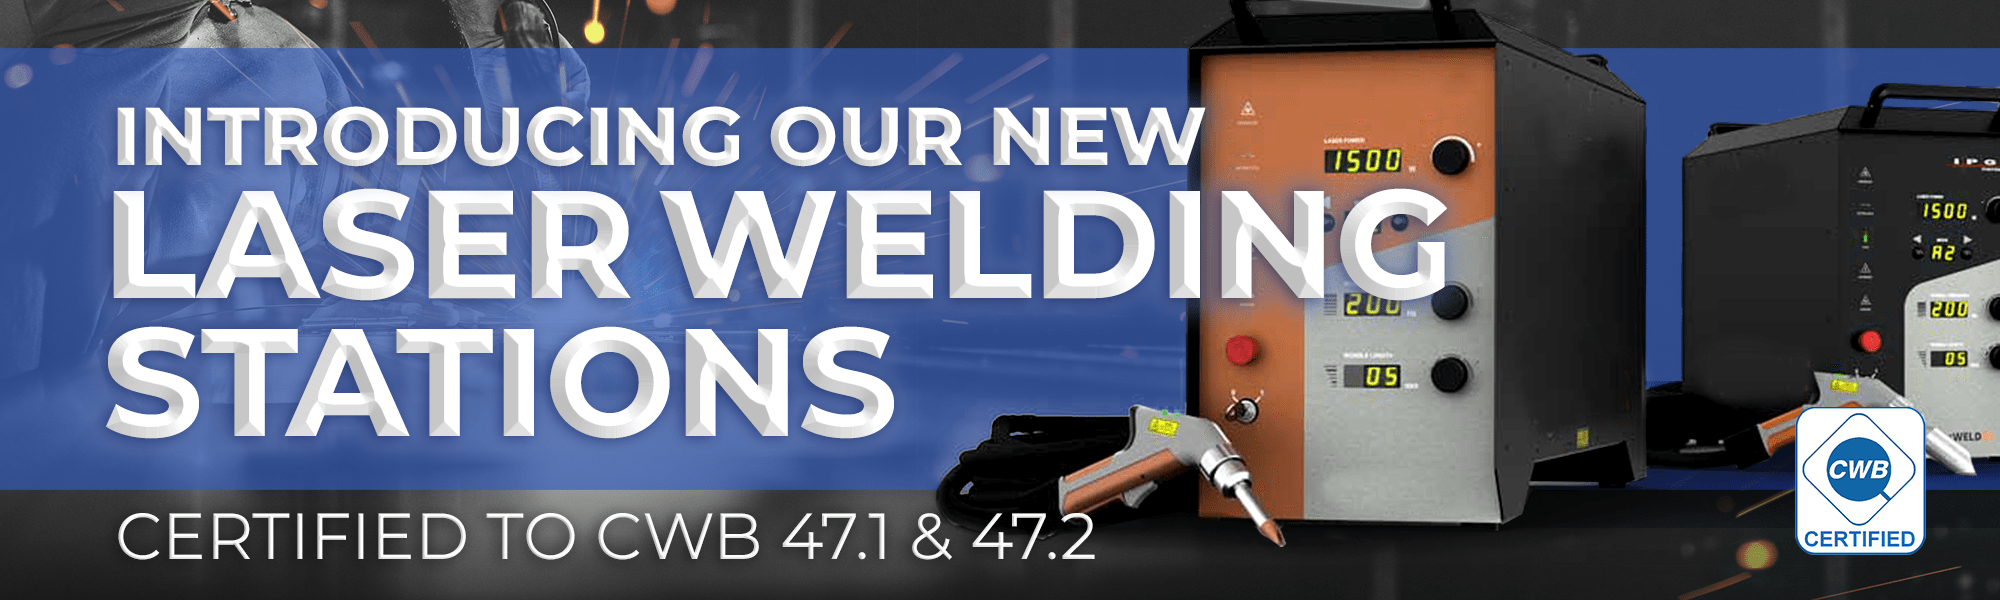 Introducing our new handheld laser welding u0026amp; cleaning